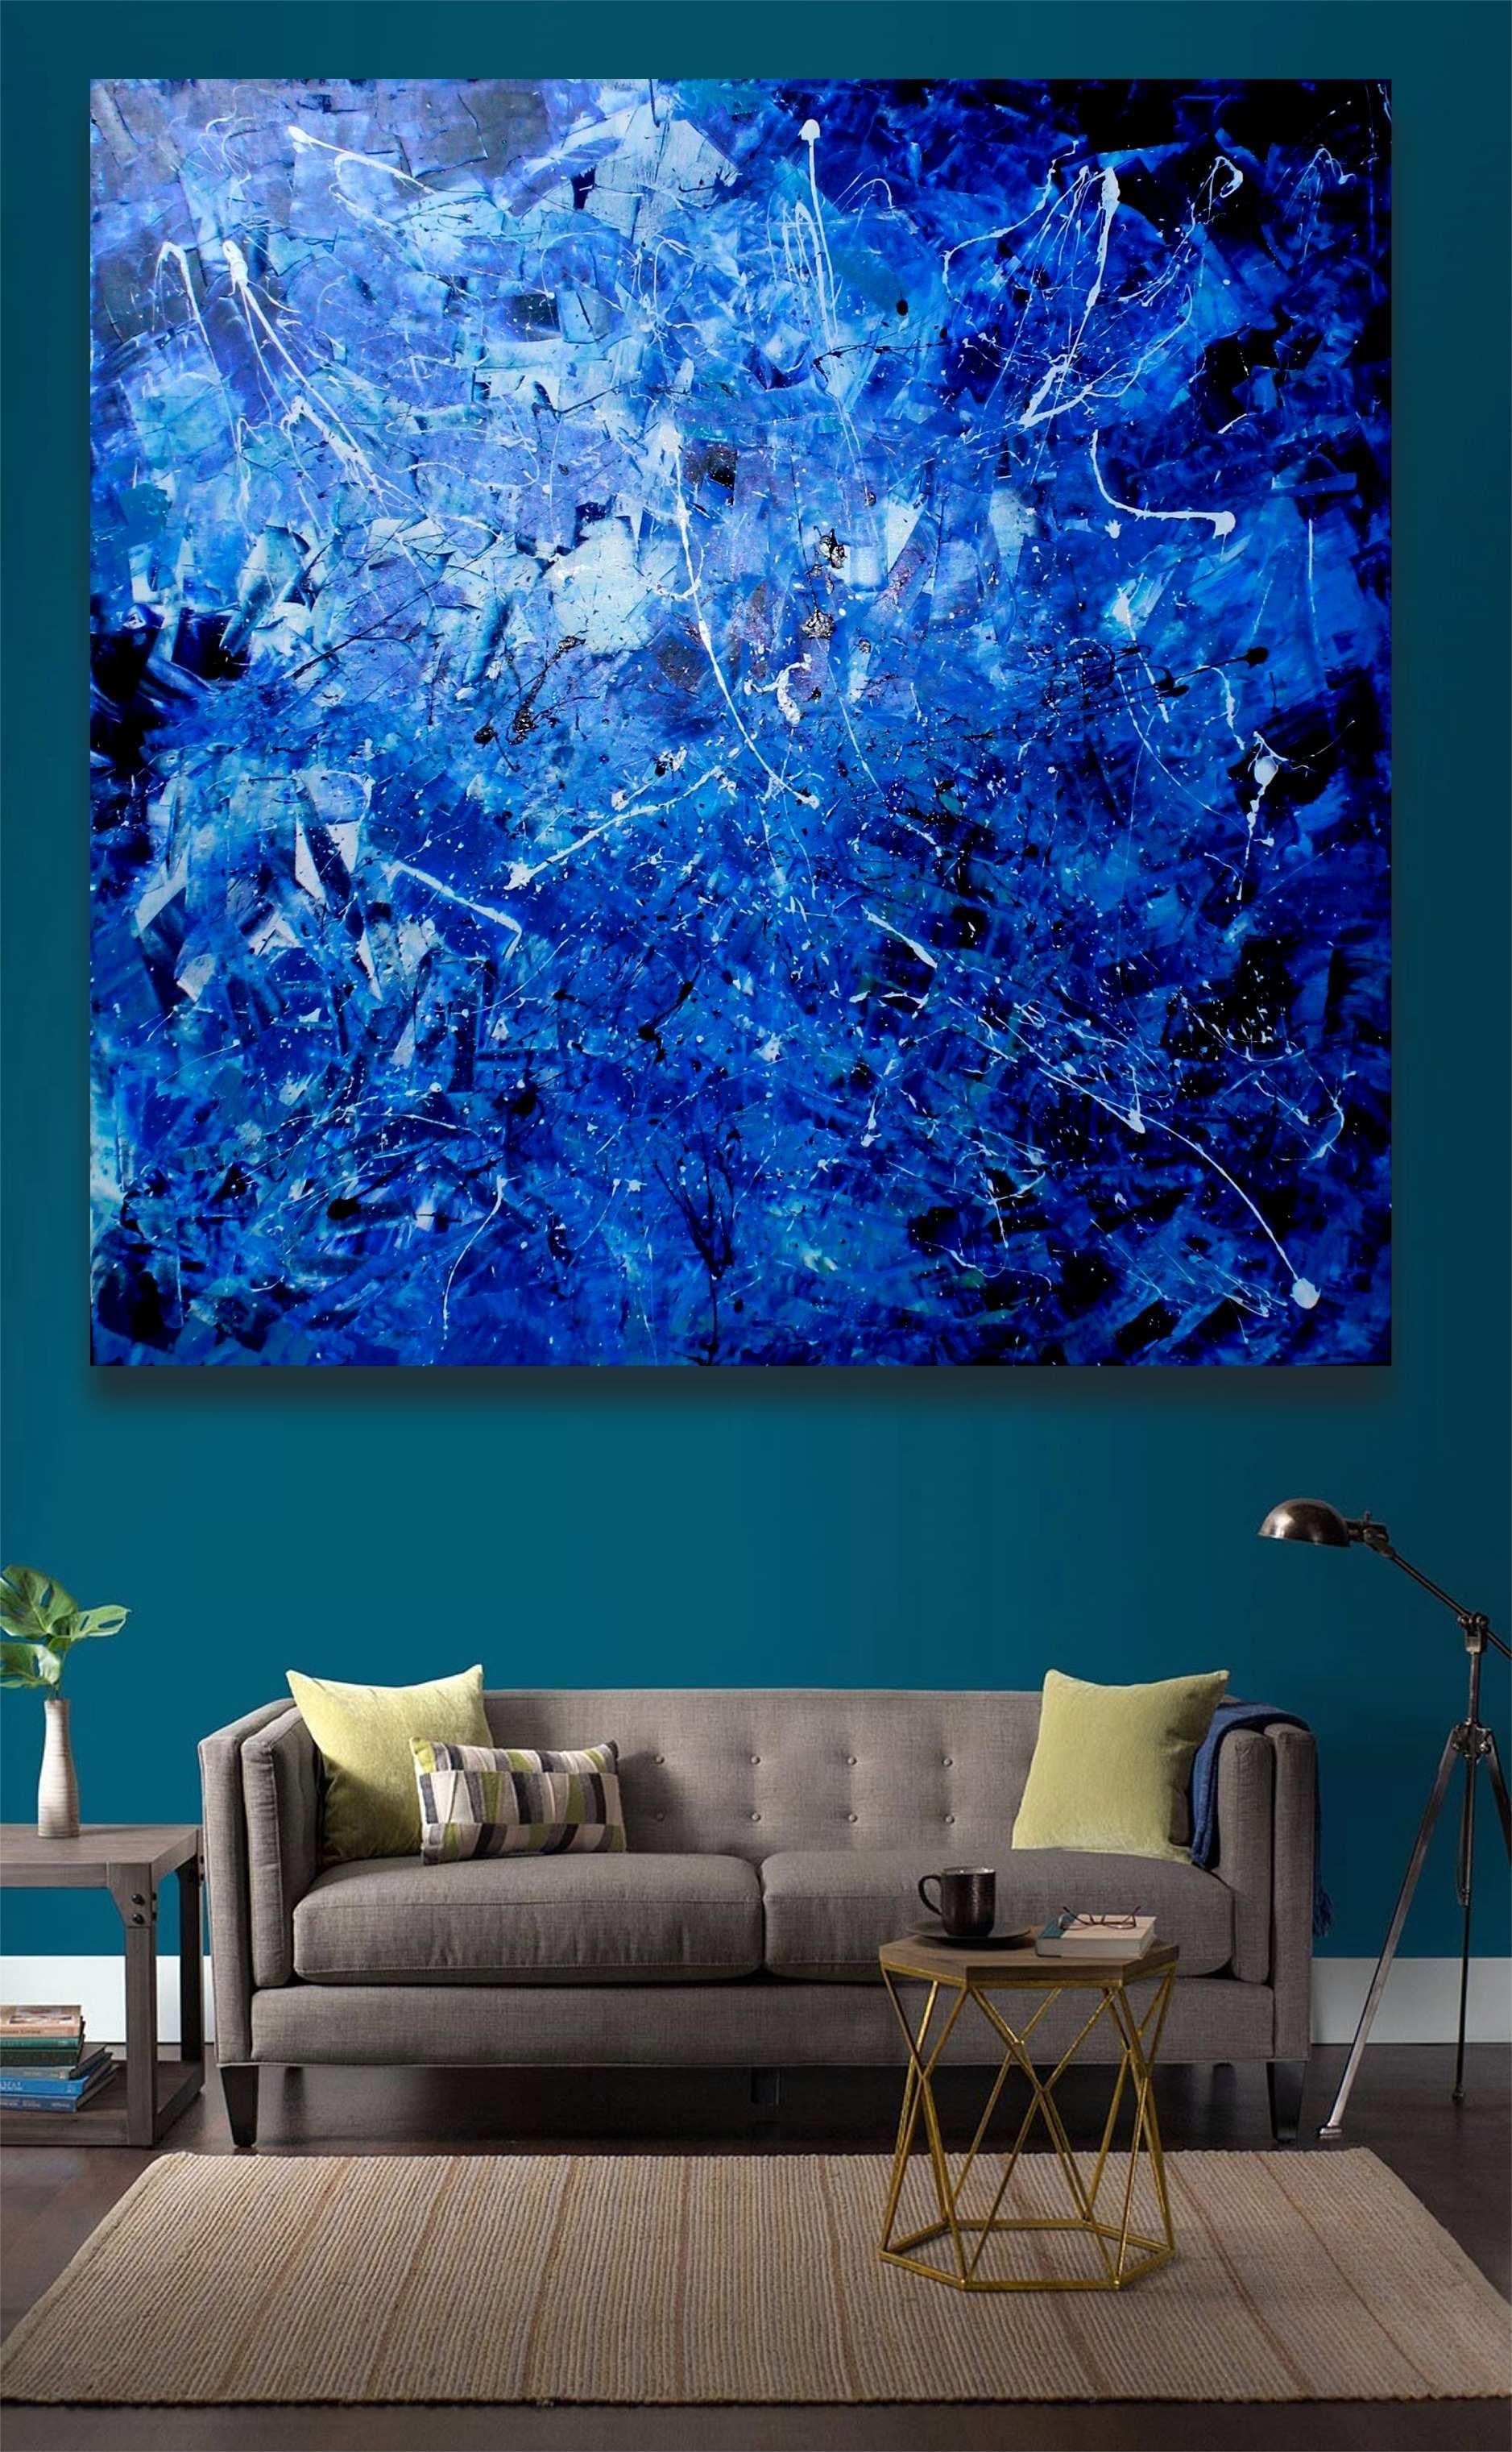 Pacific Ocean II - Abstract Expressionist Painting by Juan Jose Garay